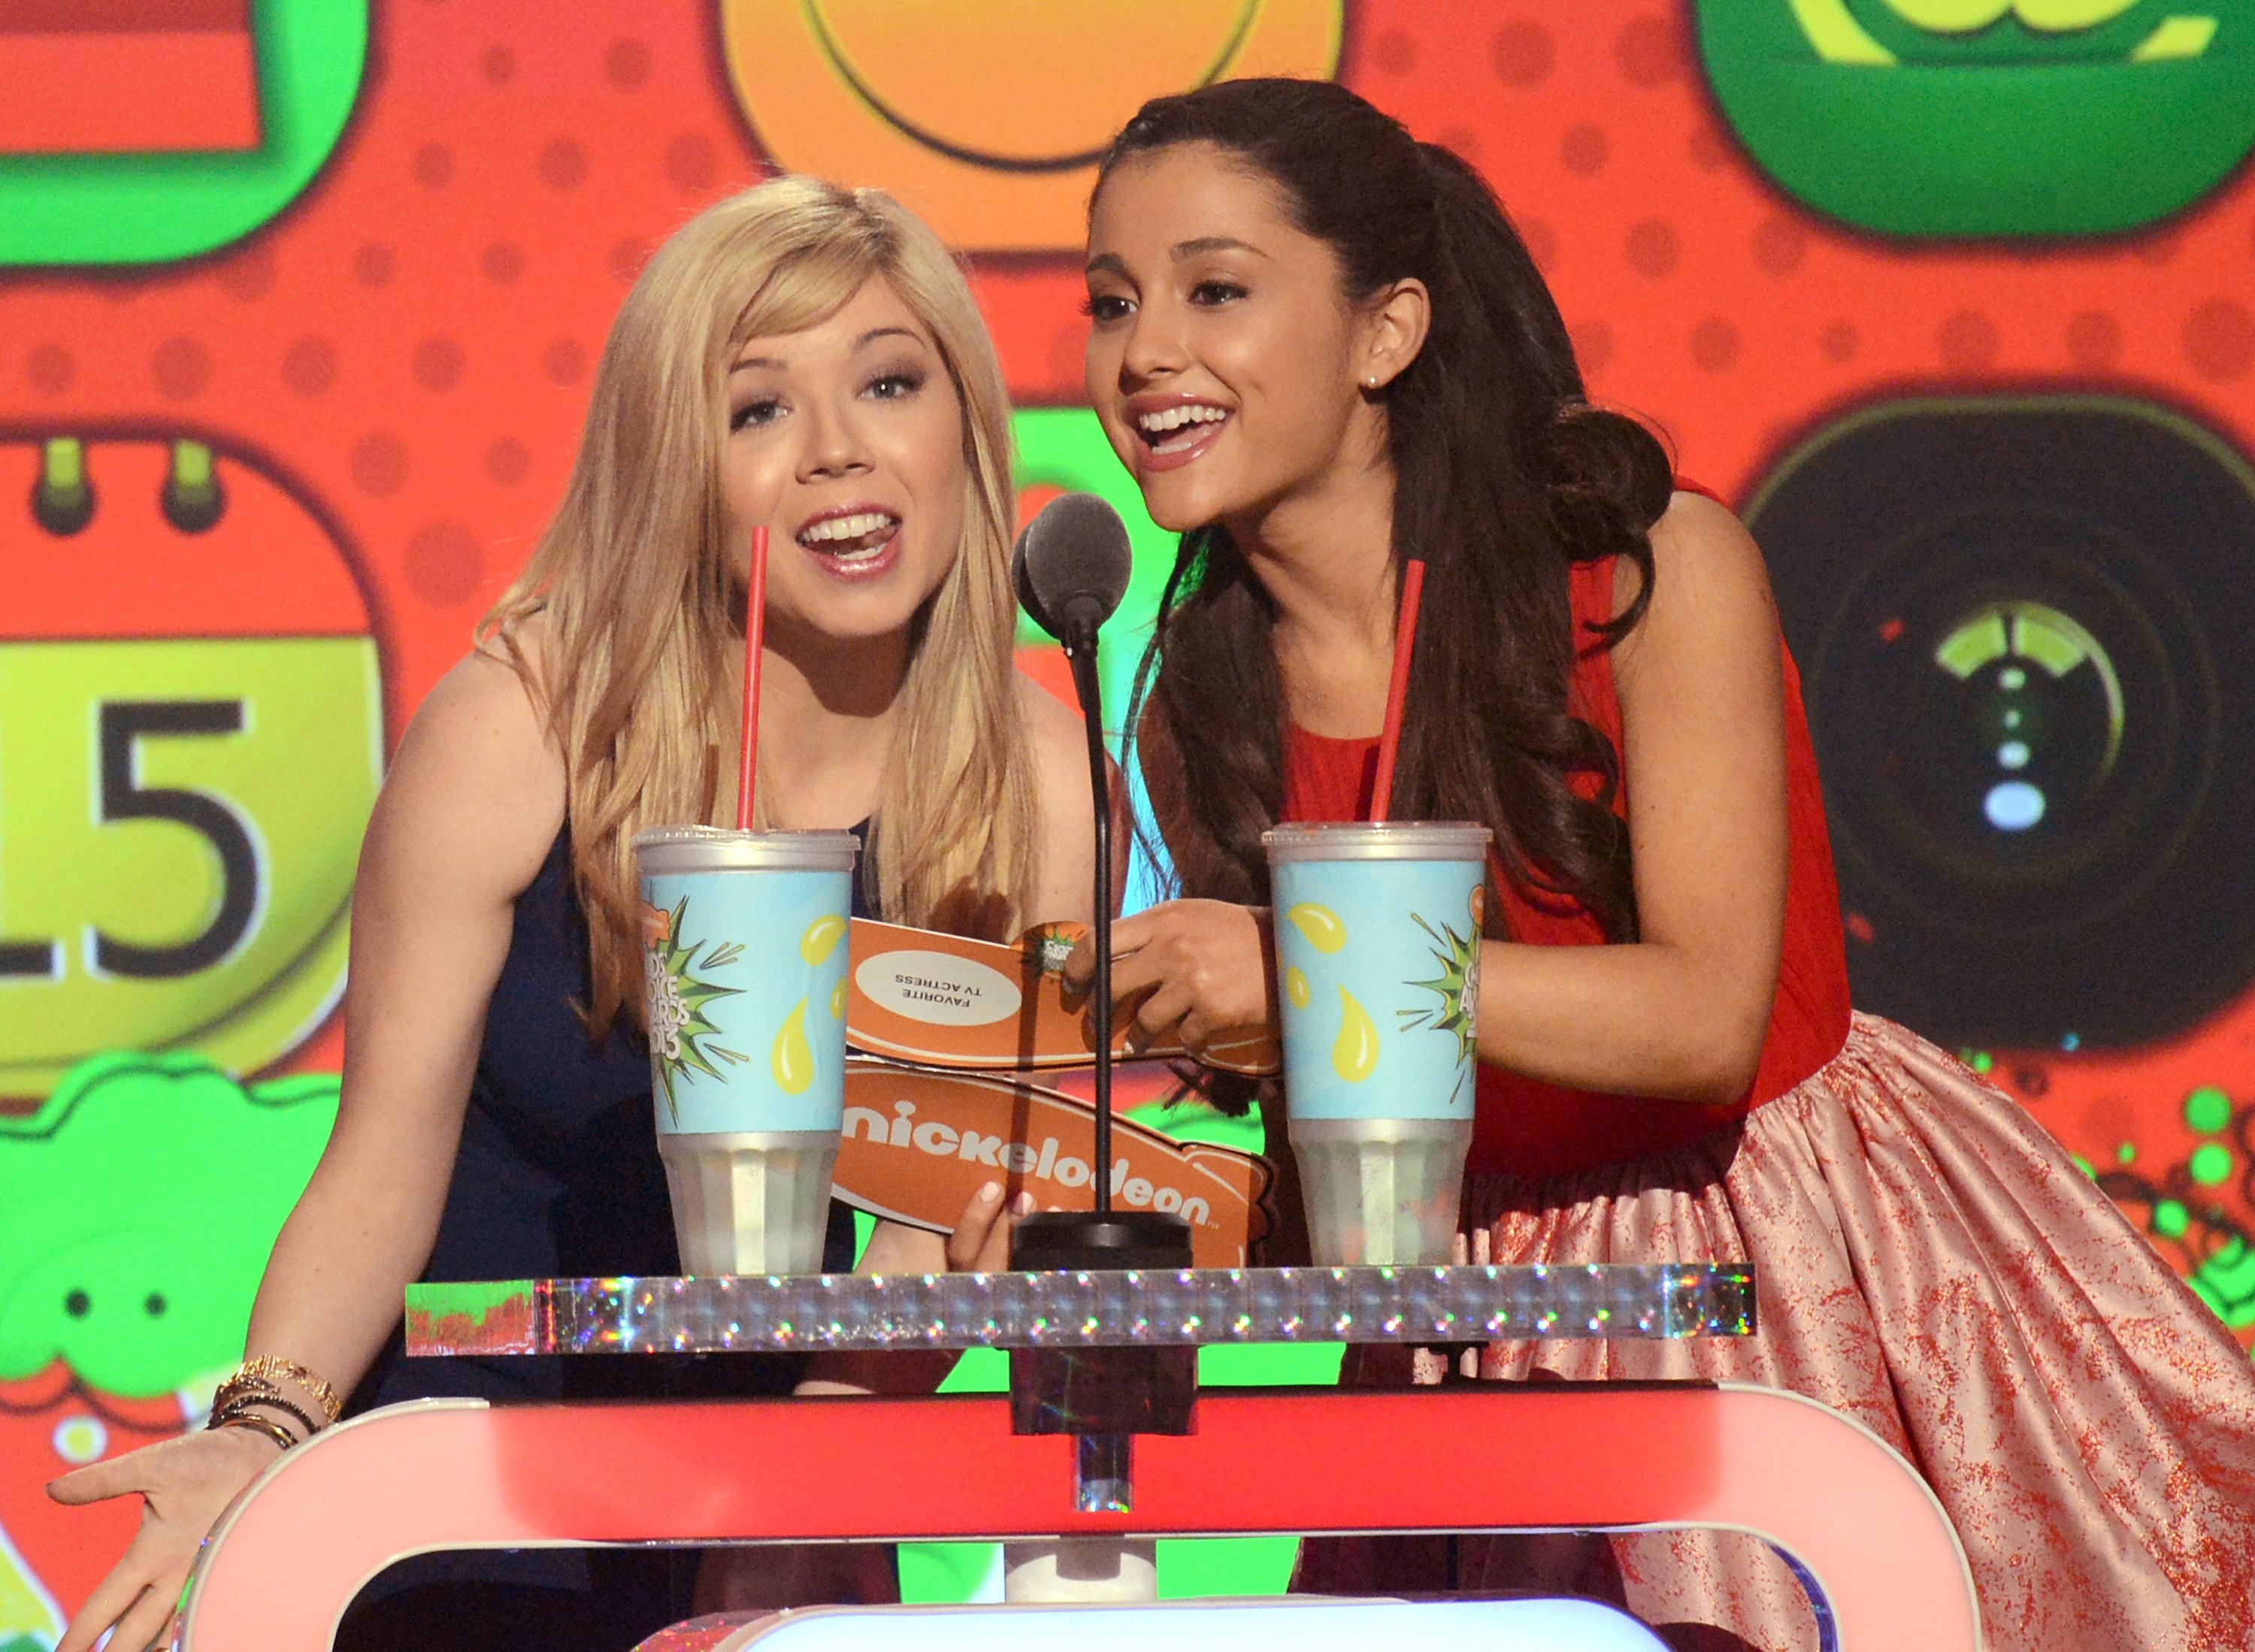 Ariana Grande Fans Are ‘Disgusted’ by Her ‘Sexualization’ on Teen Nickelodeon Show